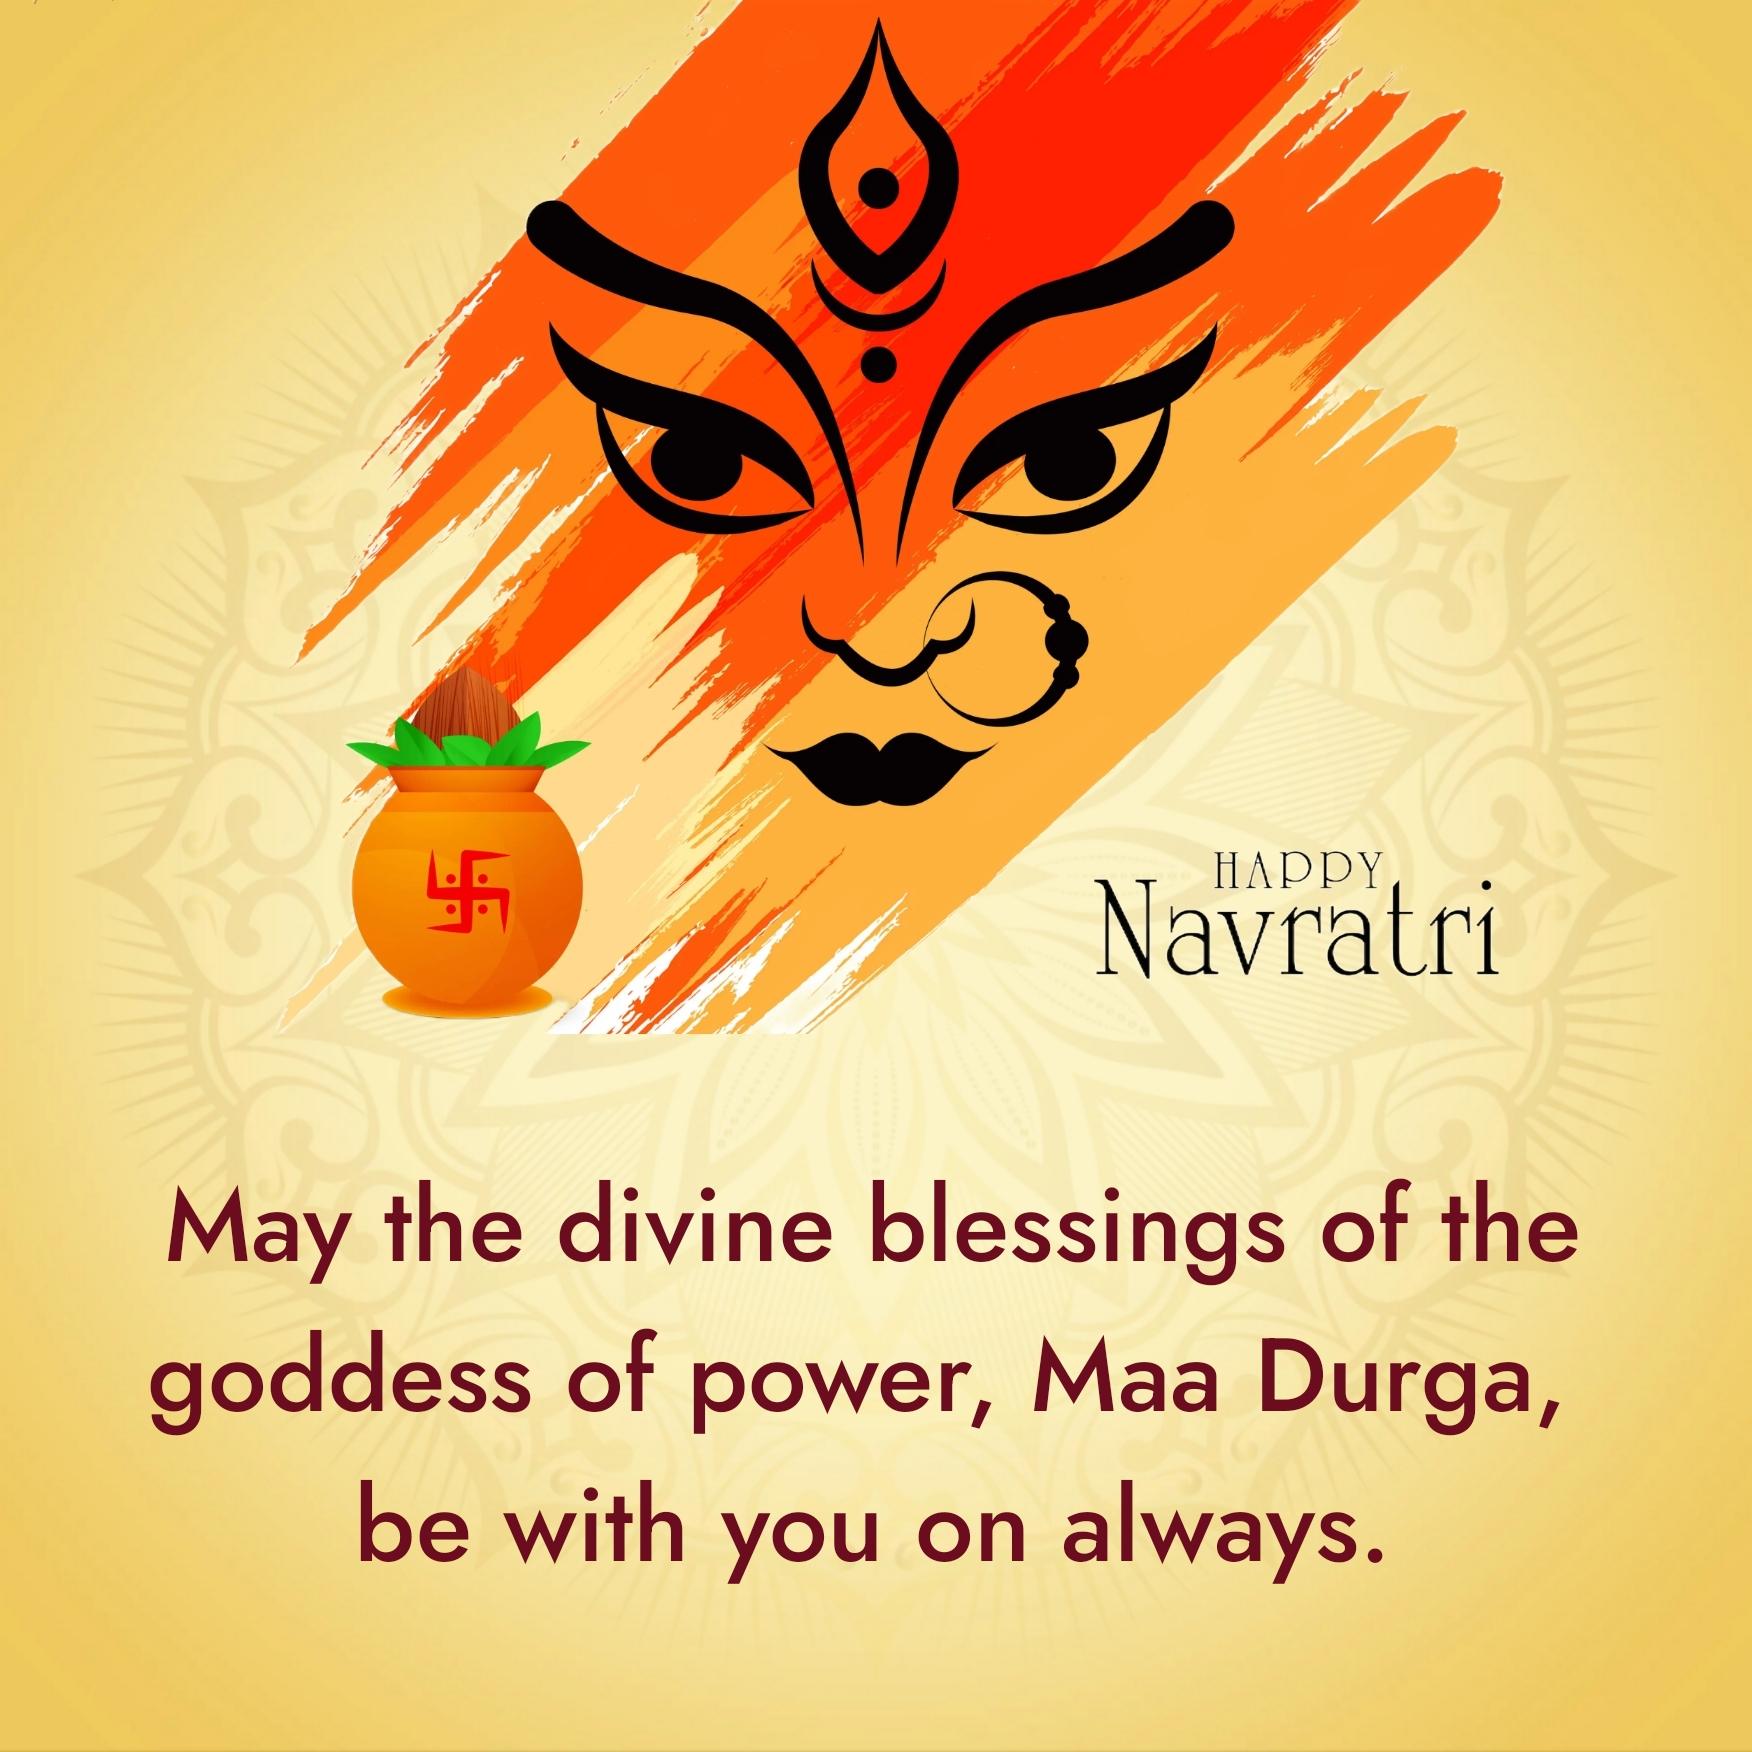 May the divine blessings of the goddess of power